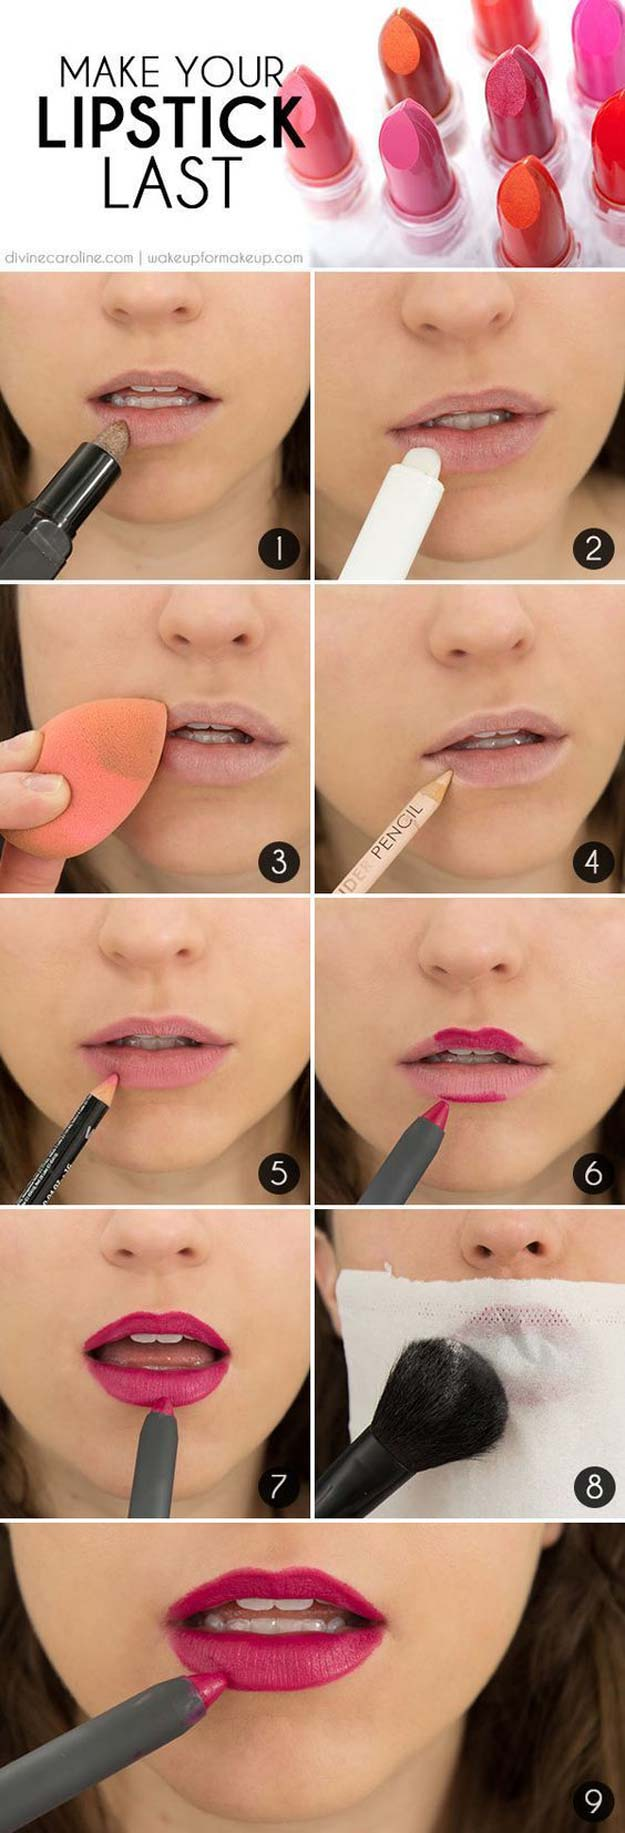 30 of the Best Lipstick Tutorials Ever! - 30 of the Best Lipstick Tutorials Ever! -   13 diy Makeup tutorial ideas